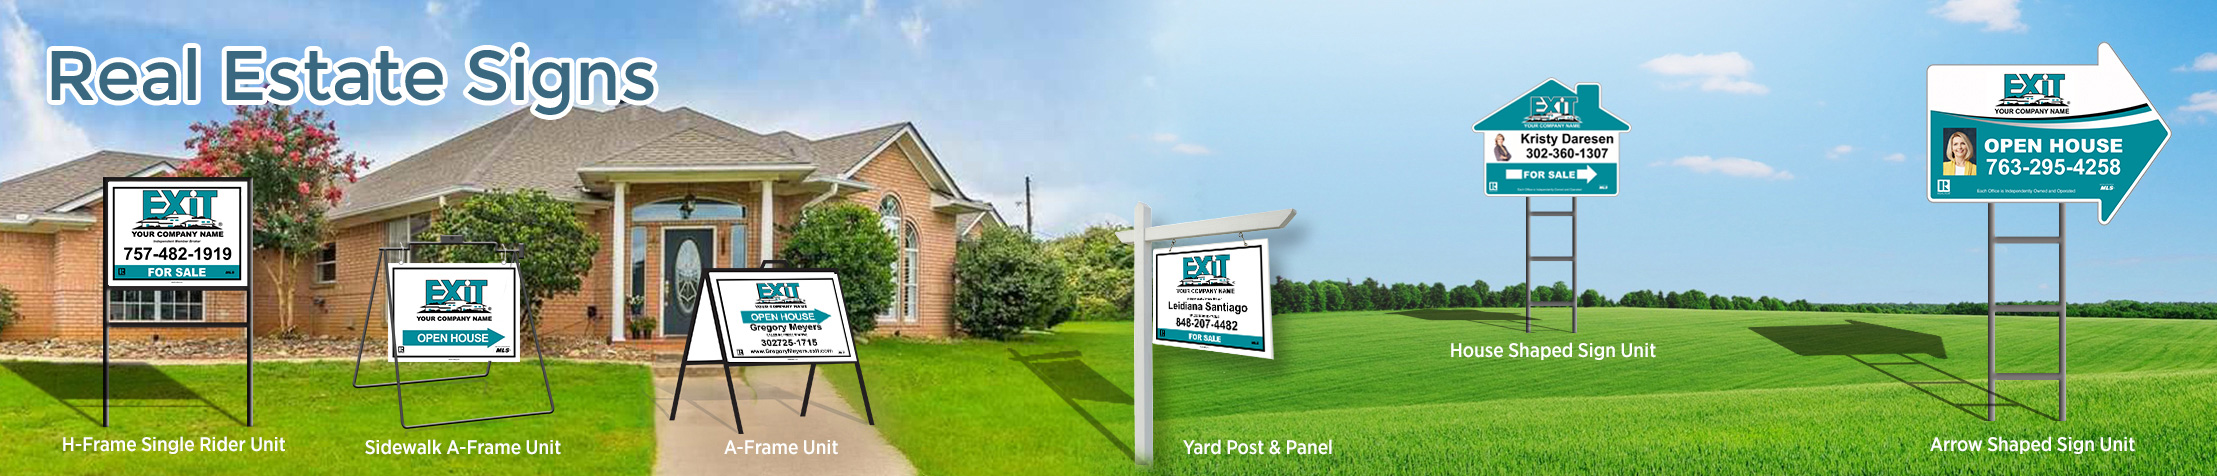 Exit Realty Signs - Exit Realty approved vendor real estate signs - H-Frame Units, Directional Signs, A-Frame Units, Yard Post and Panel | BestPrintBuy.com